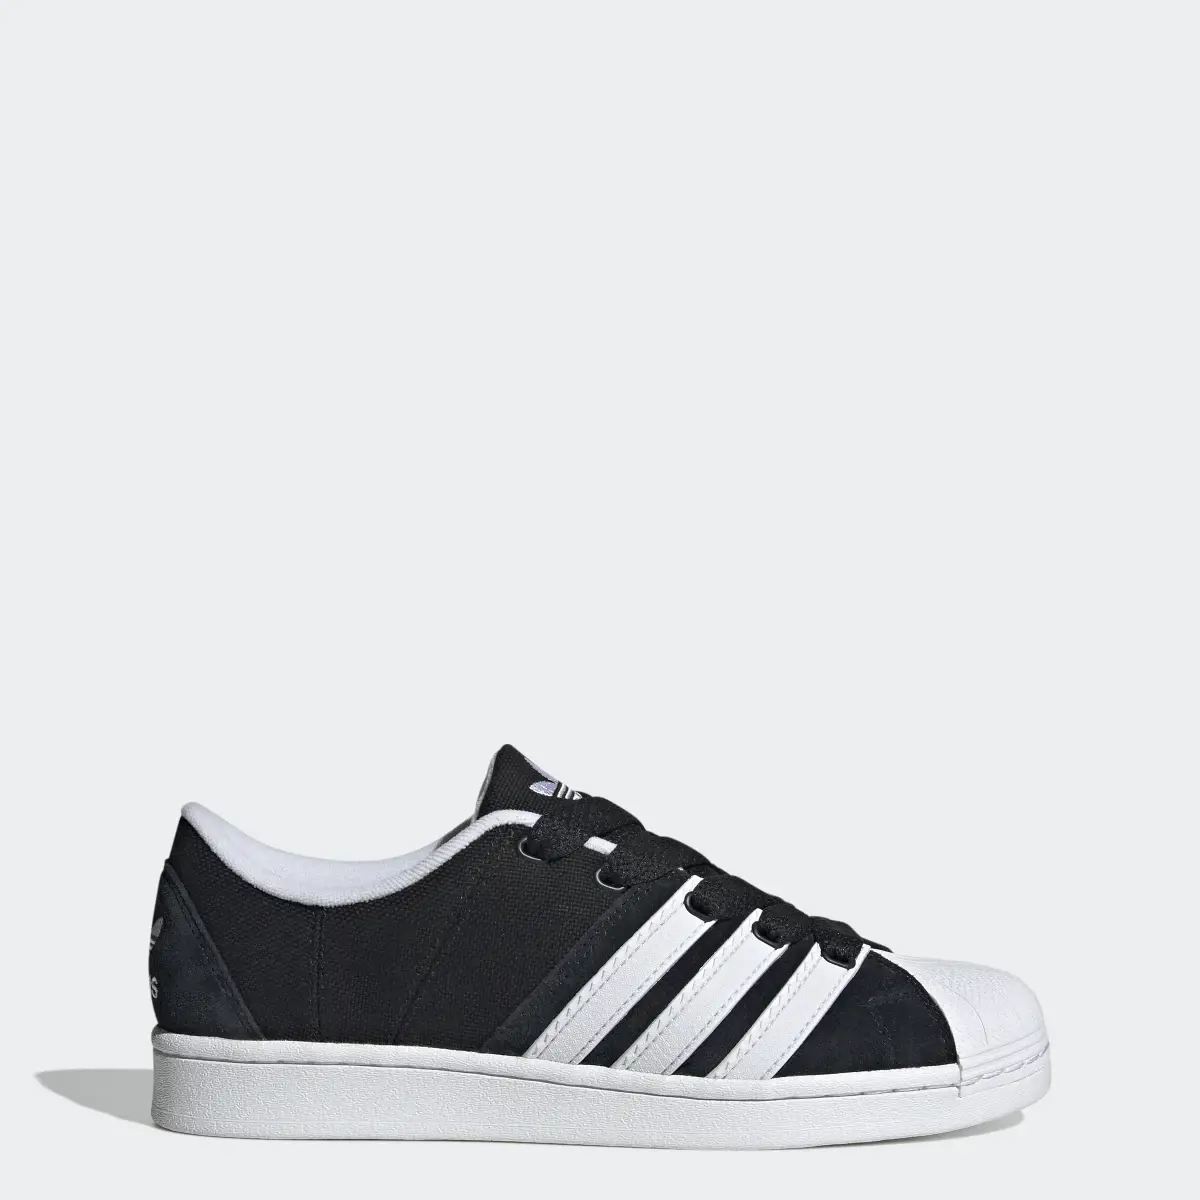 Adidas Superstar Supermodified Shoes. 1